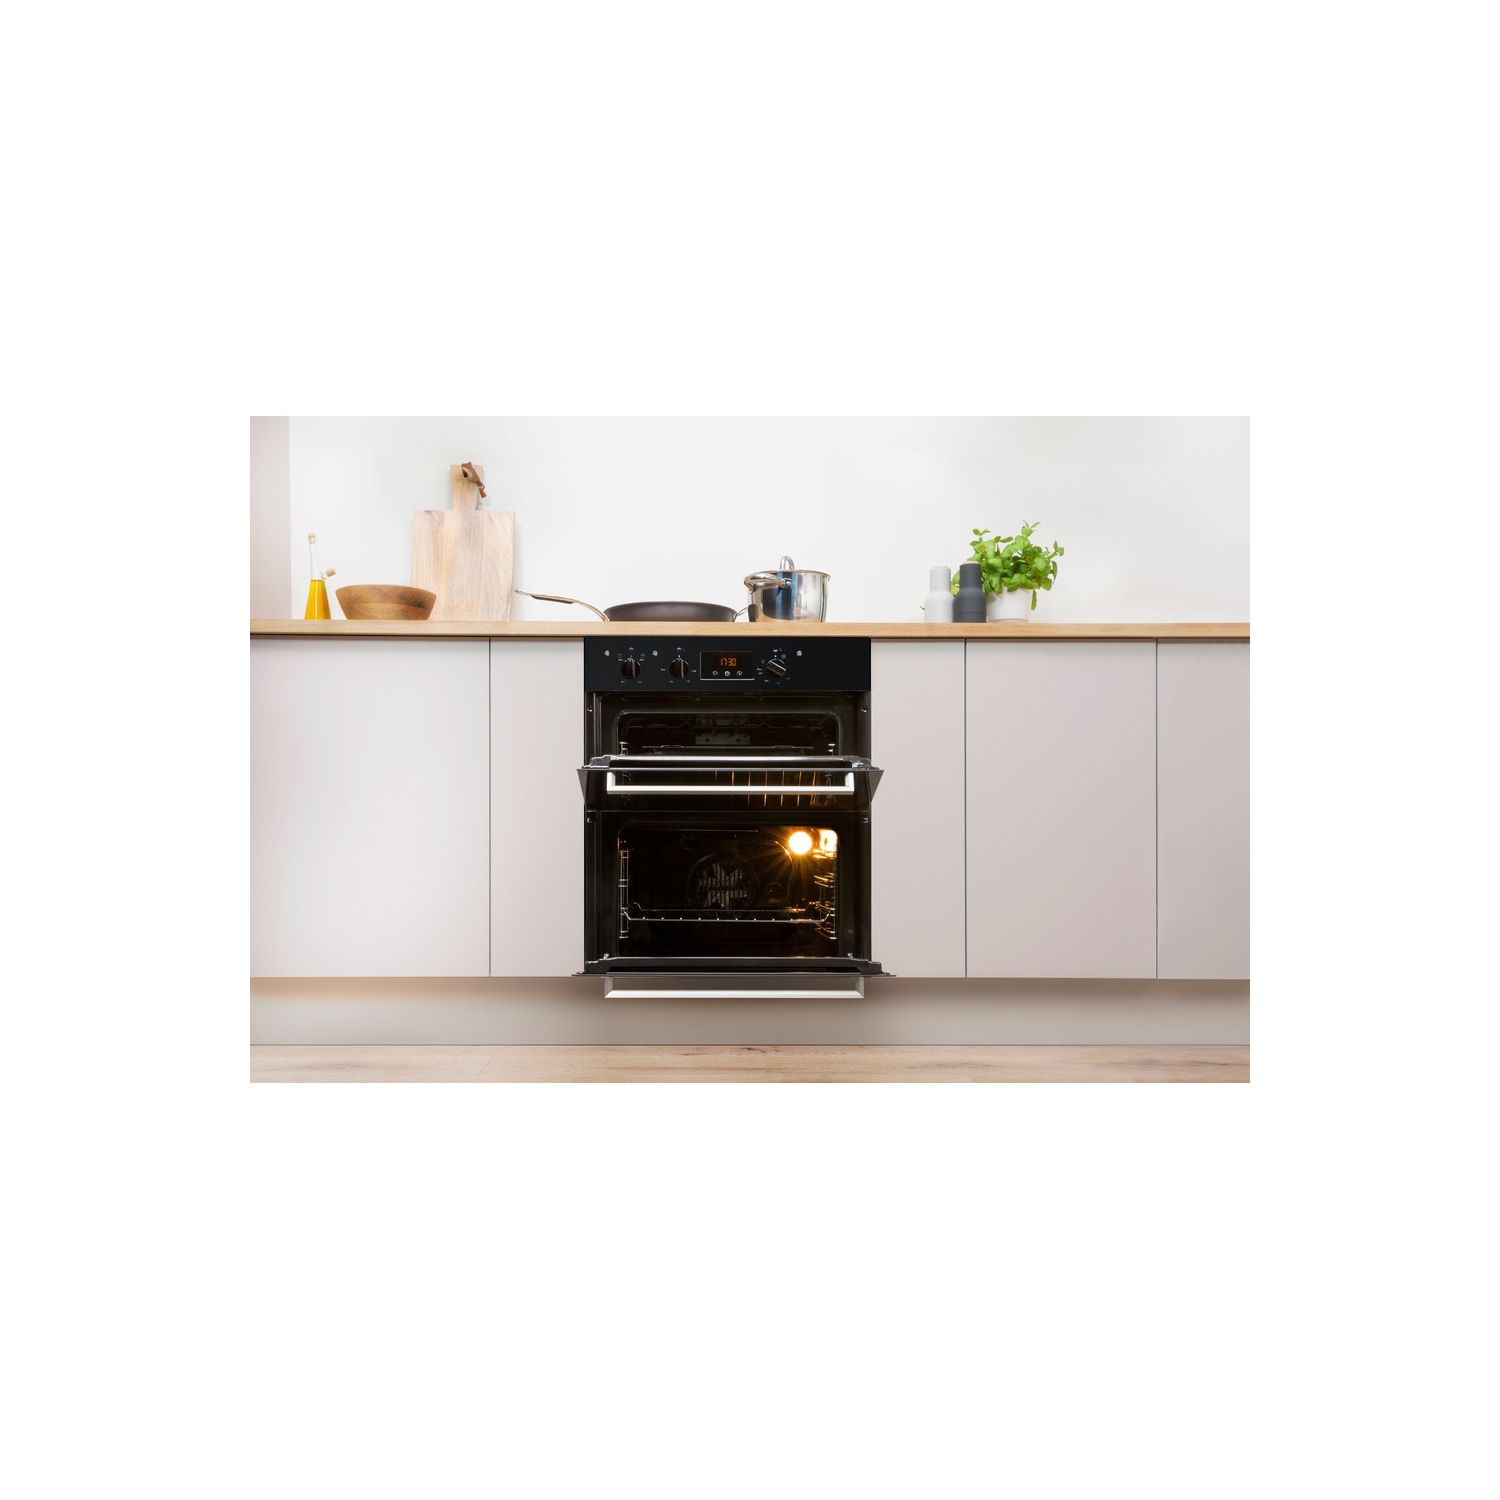 Indesit Built In Electric Double Oven - Black - B Rated - 7